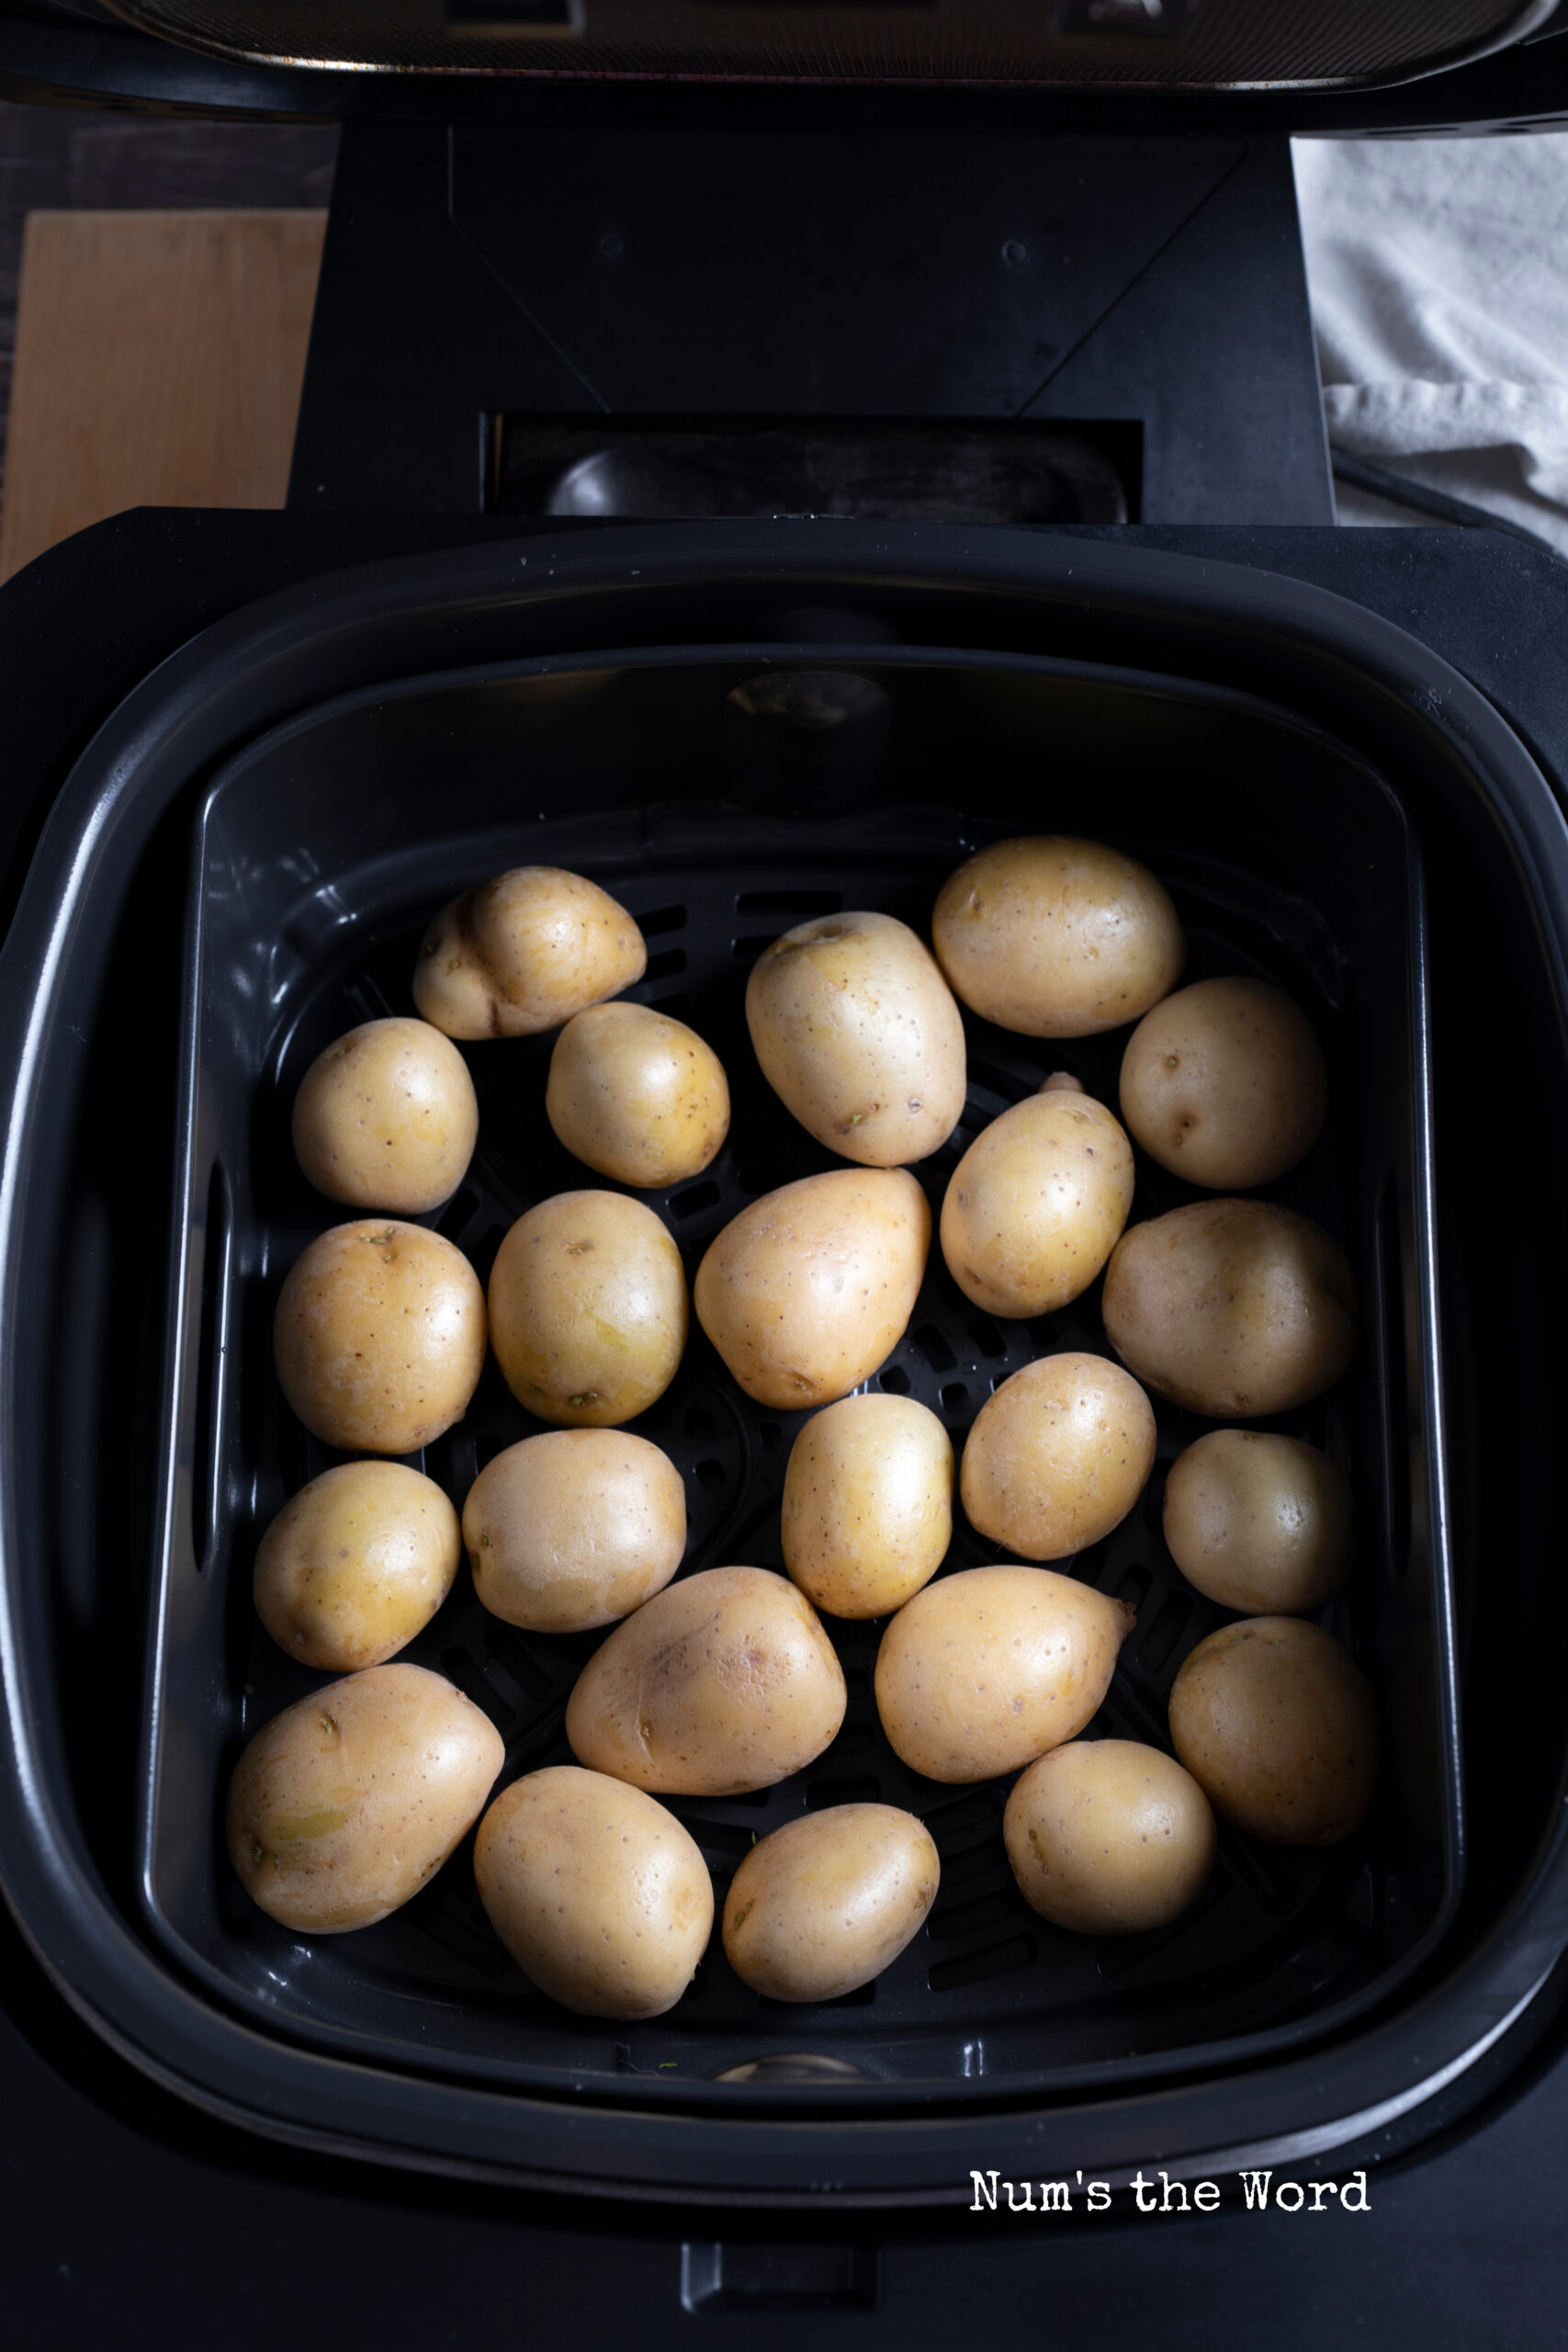 uncooked baby potatoes in air fryer ready to be cooked